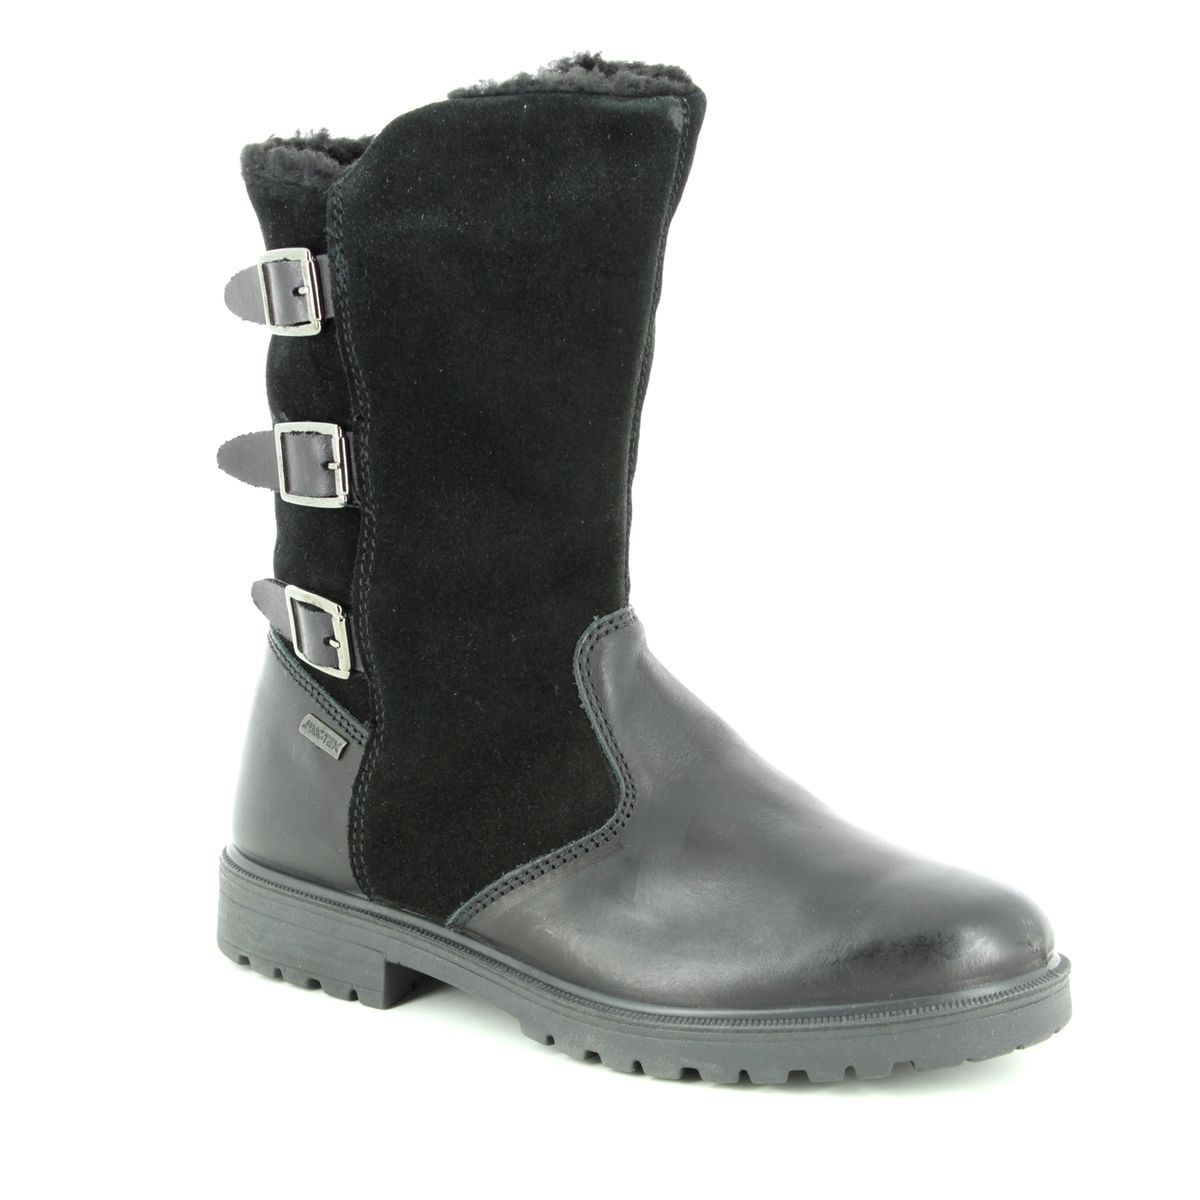 IMAC Chris Hi Tex Black leather Kids Girls boots 0698-1998011 in a Plain Leather in Size 40